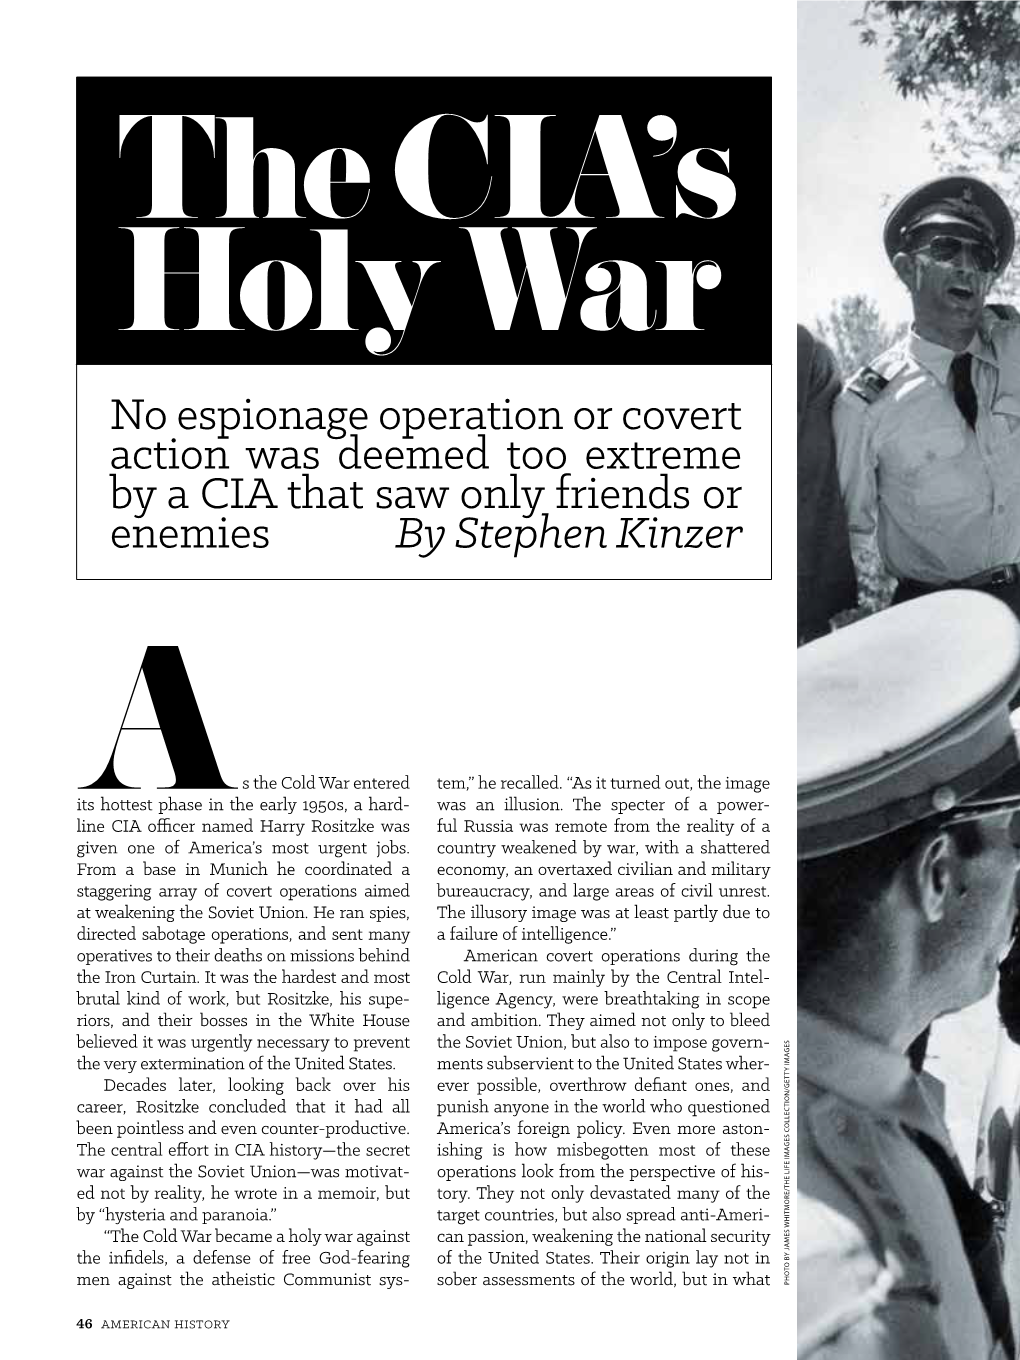 The CIA's Holy